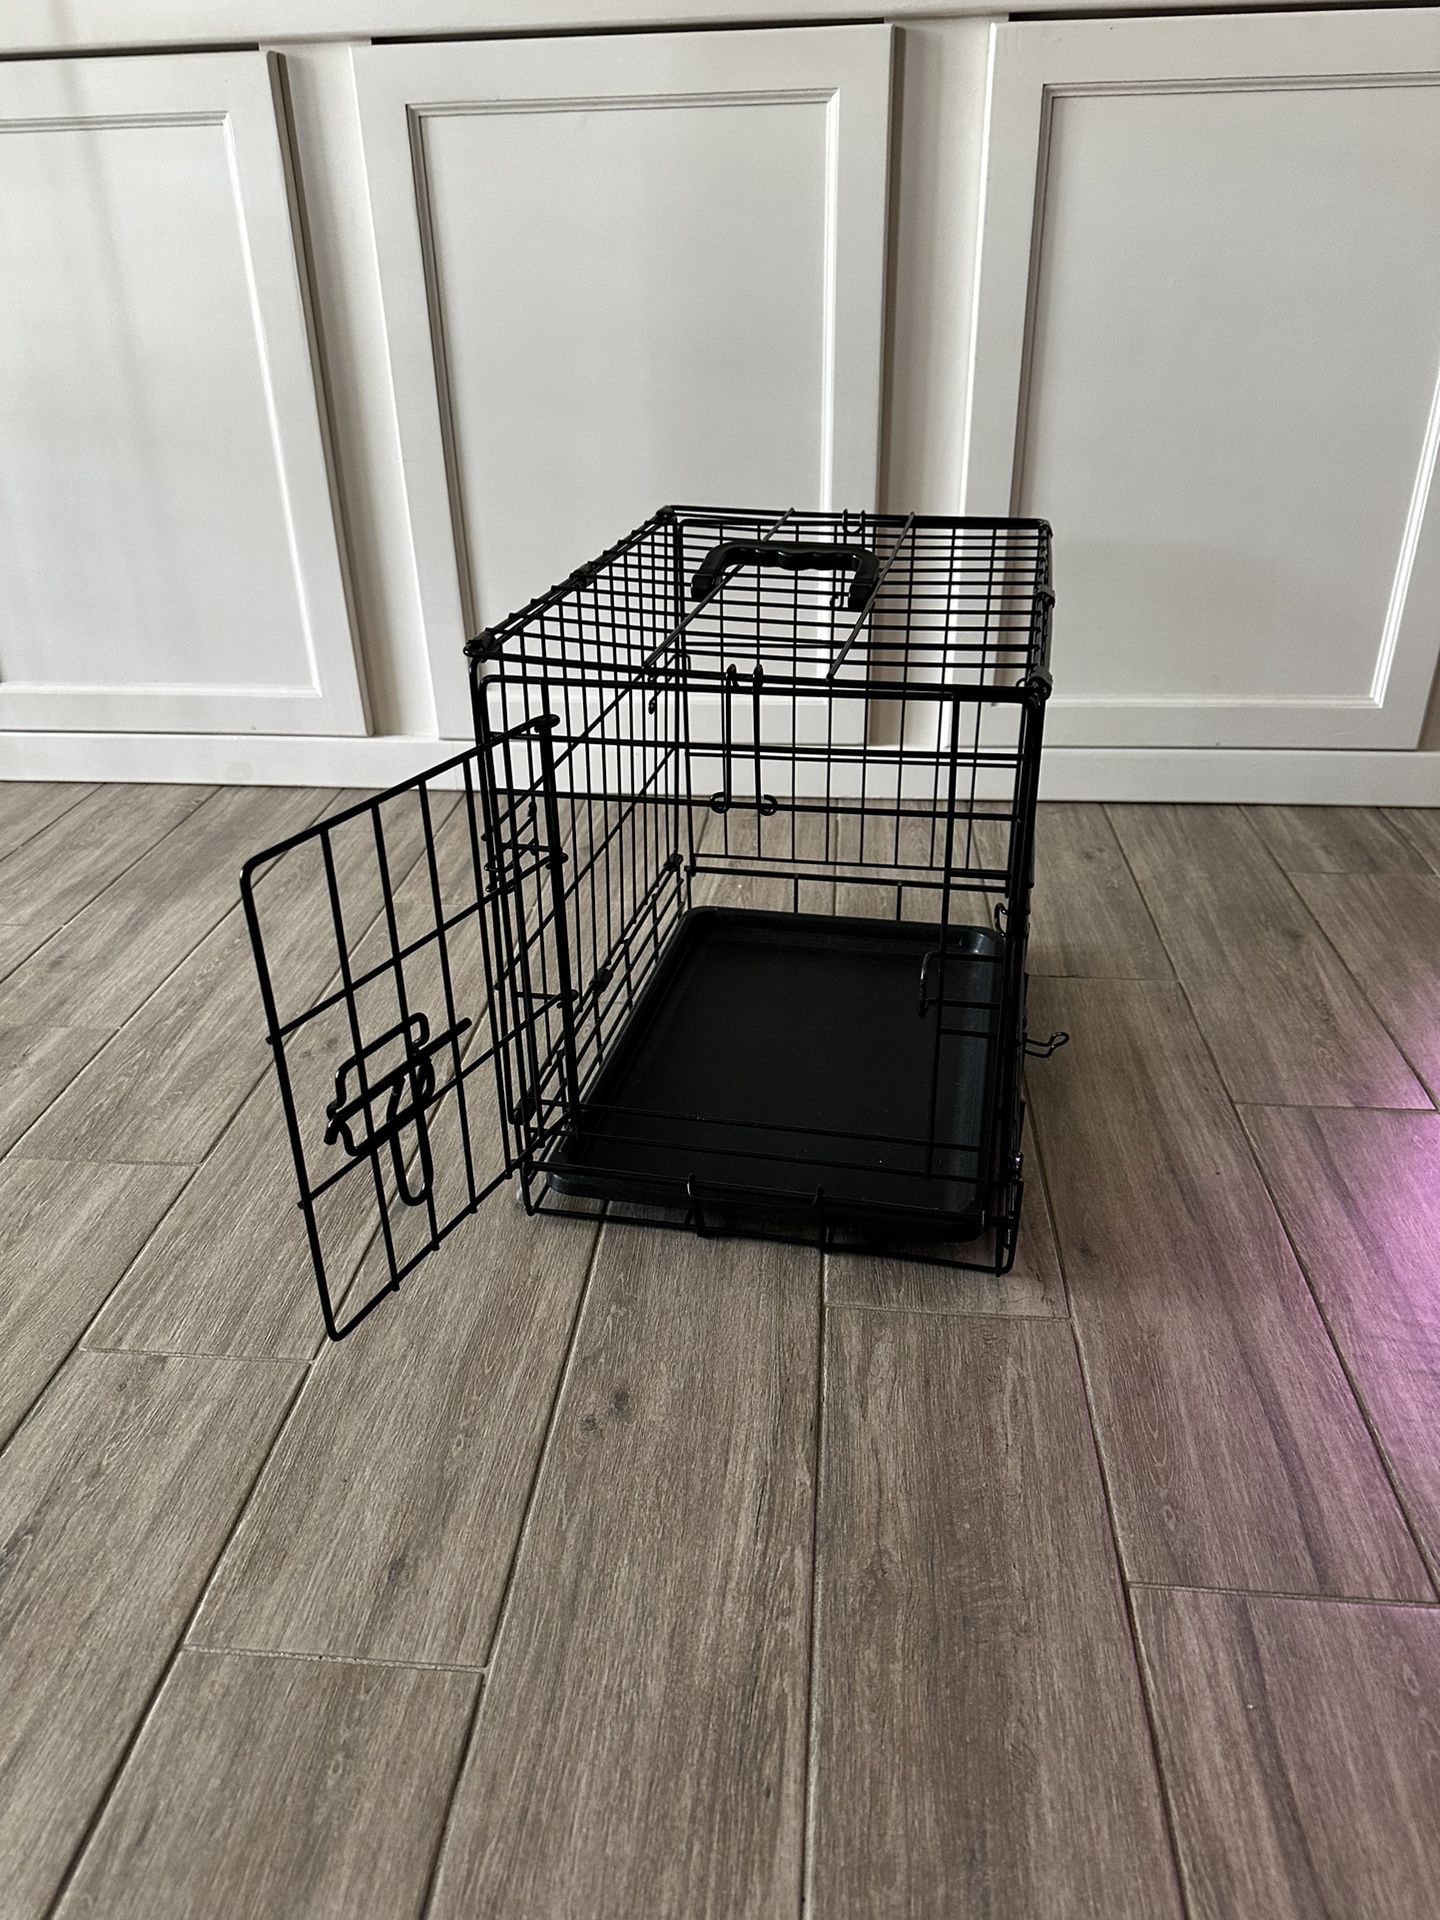 Small Dog Crate. 